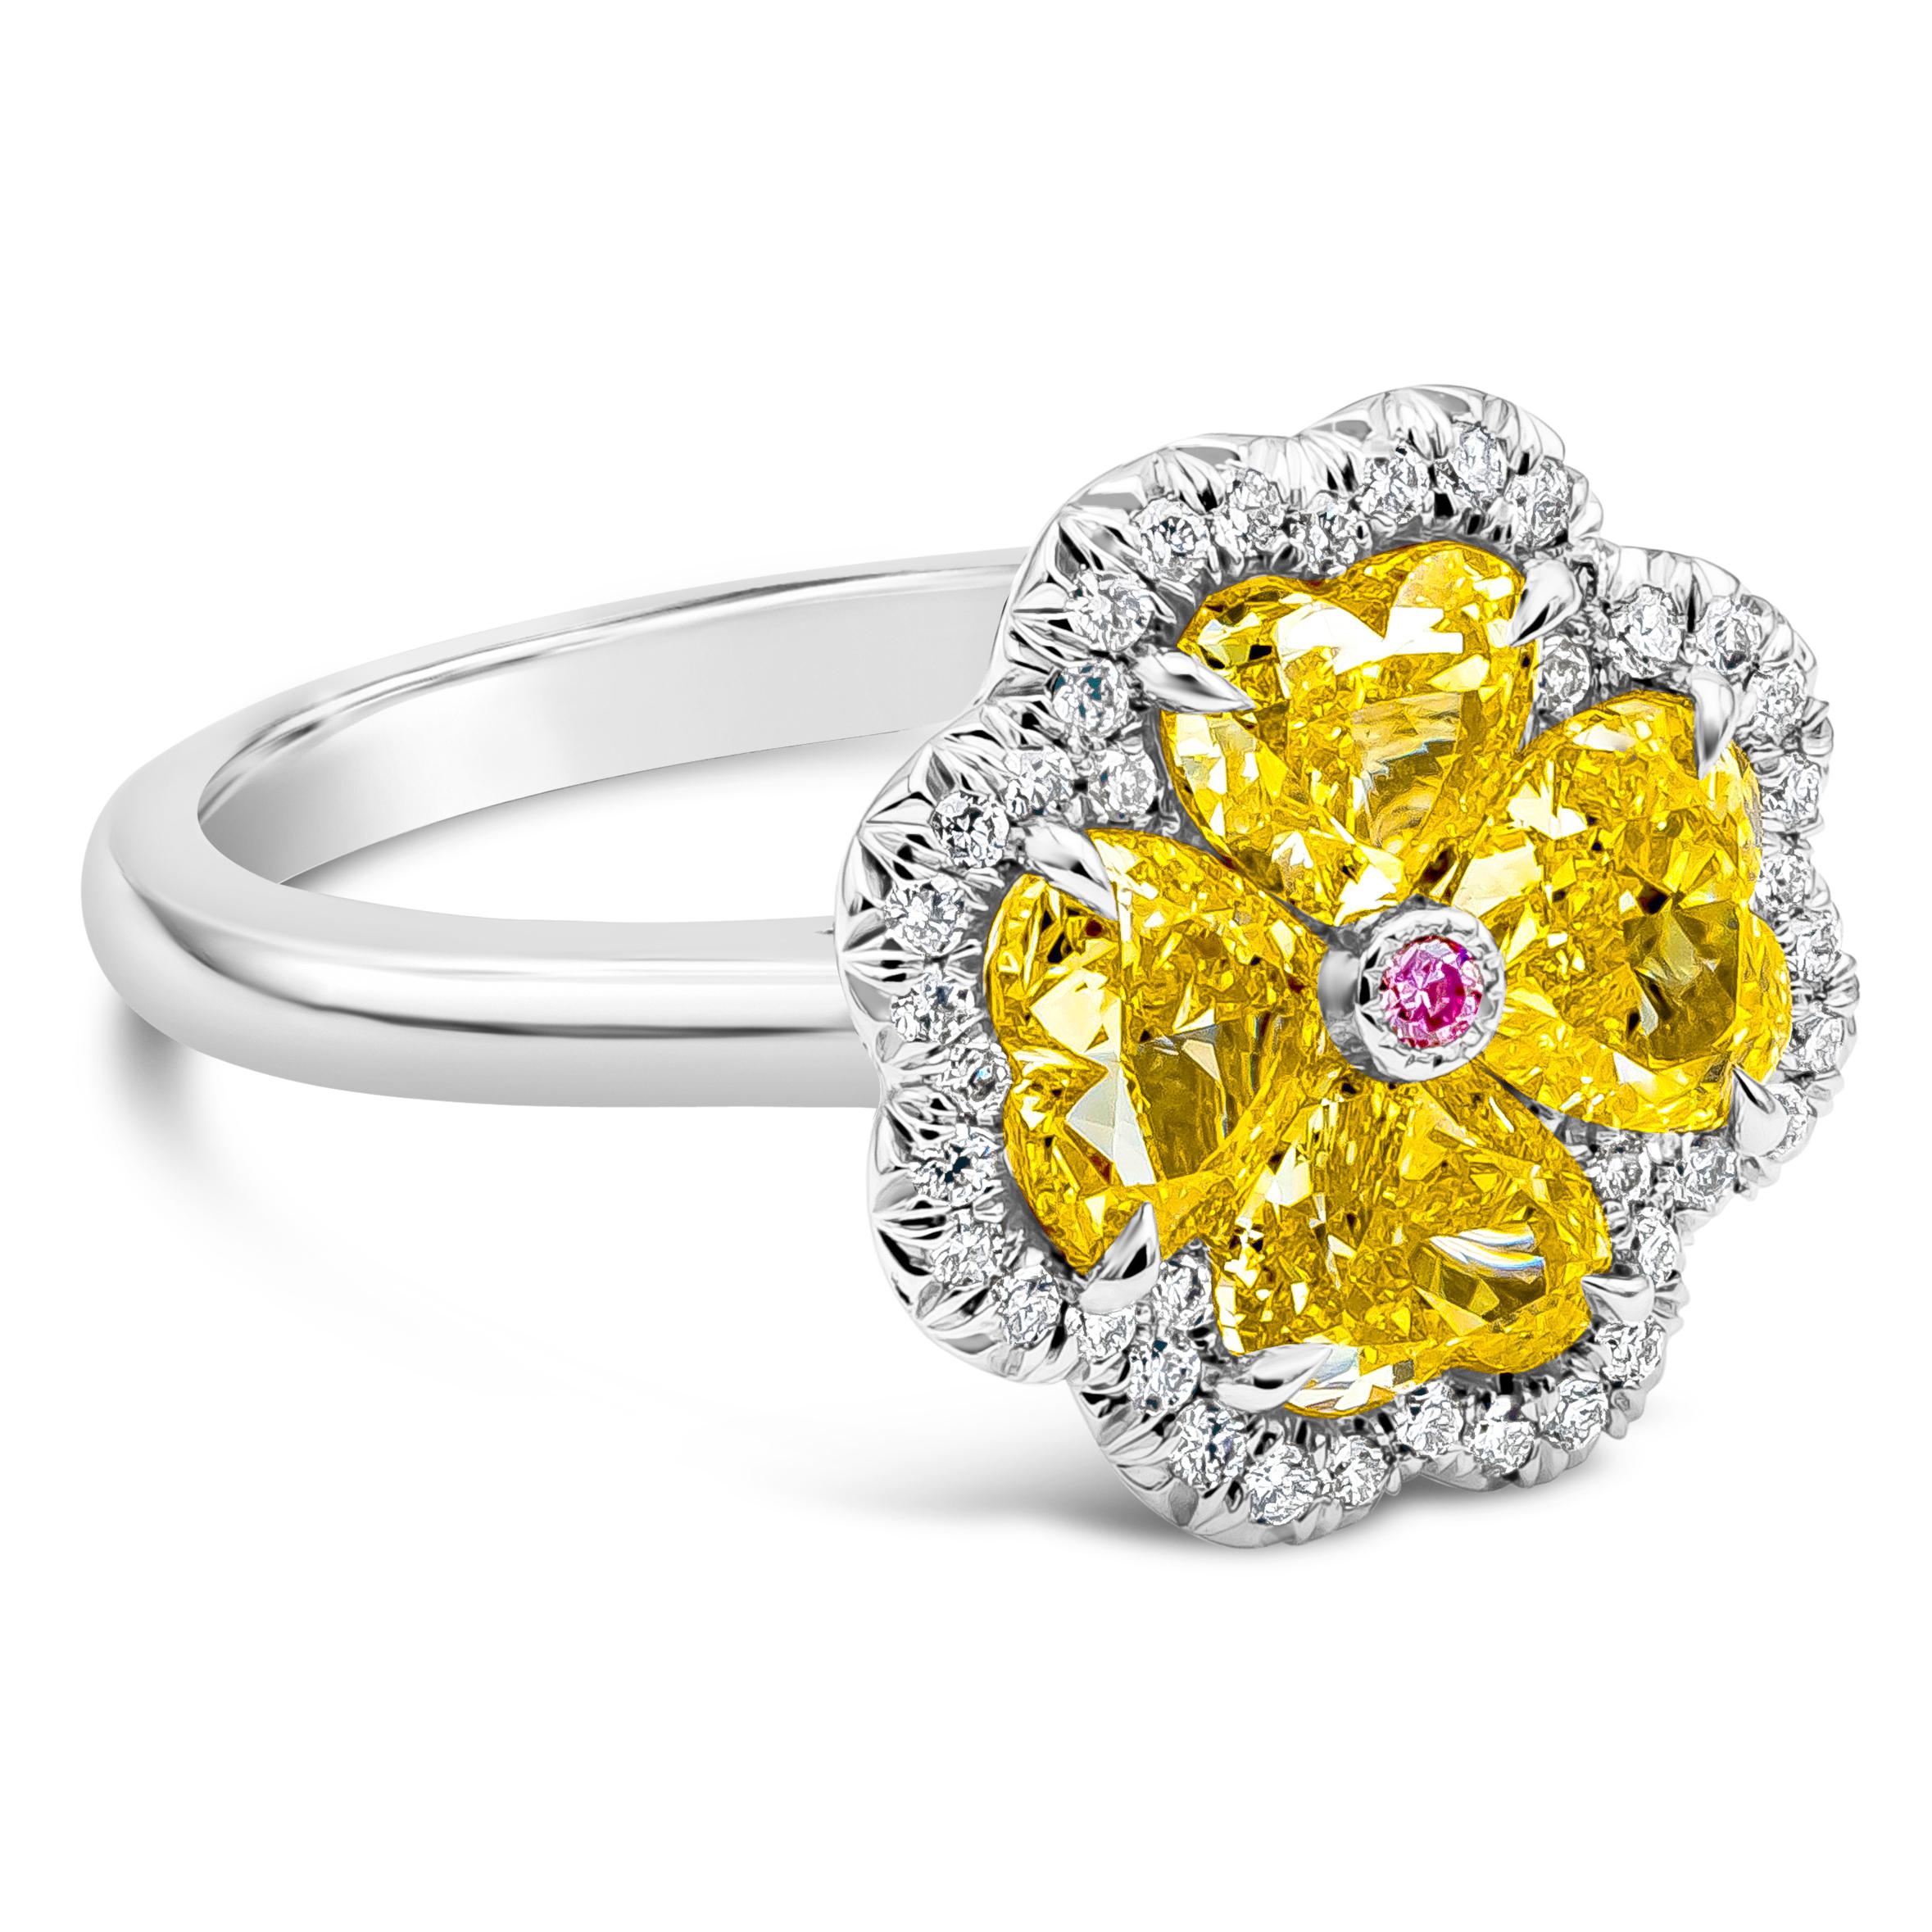 A elegant and exquisite fashion ring showcasing four heart shape diamonds weighing 2.21 carats total, Fancy Intense Yellow in color and VS+ in Clarity, Single round Fancy Intense Pink diamond accents the center set in 18K white gold. Surrounded  by